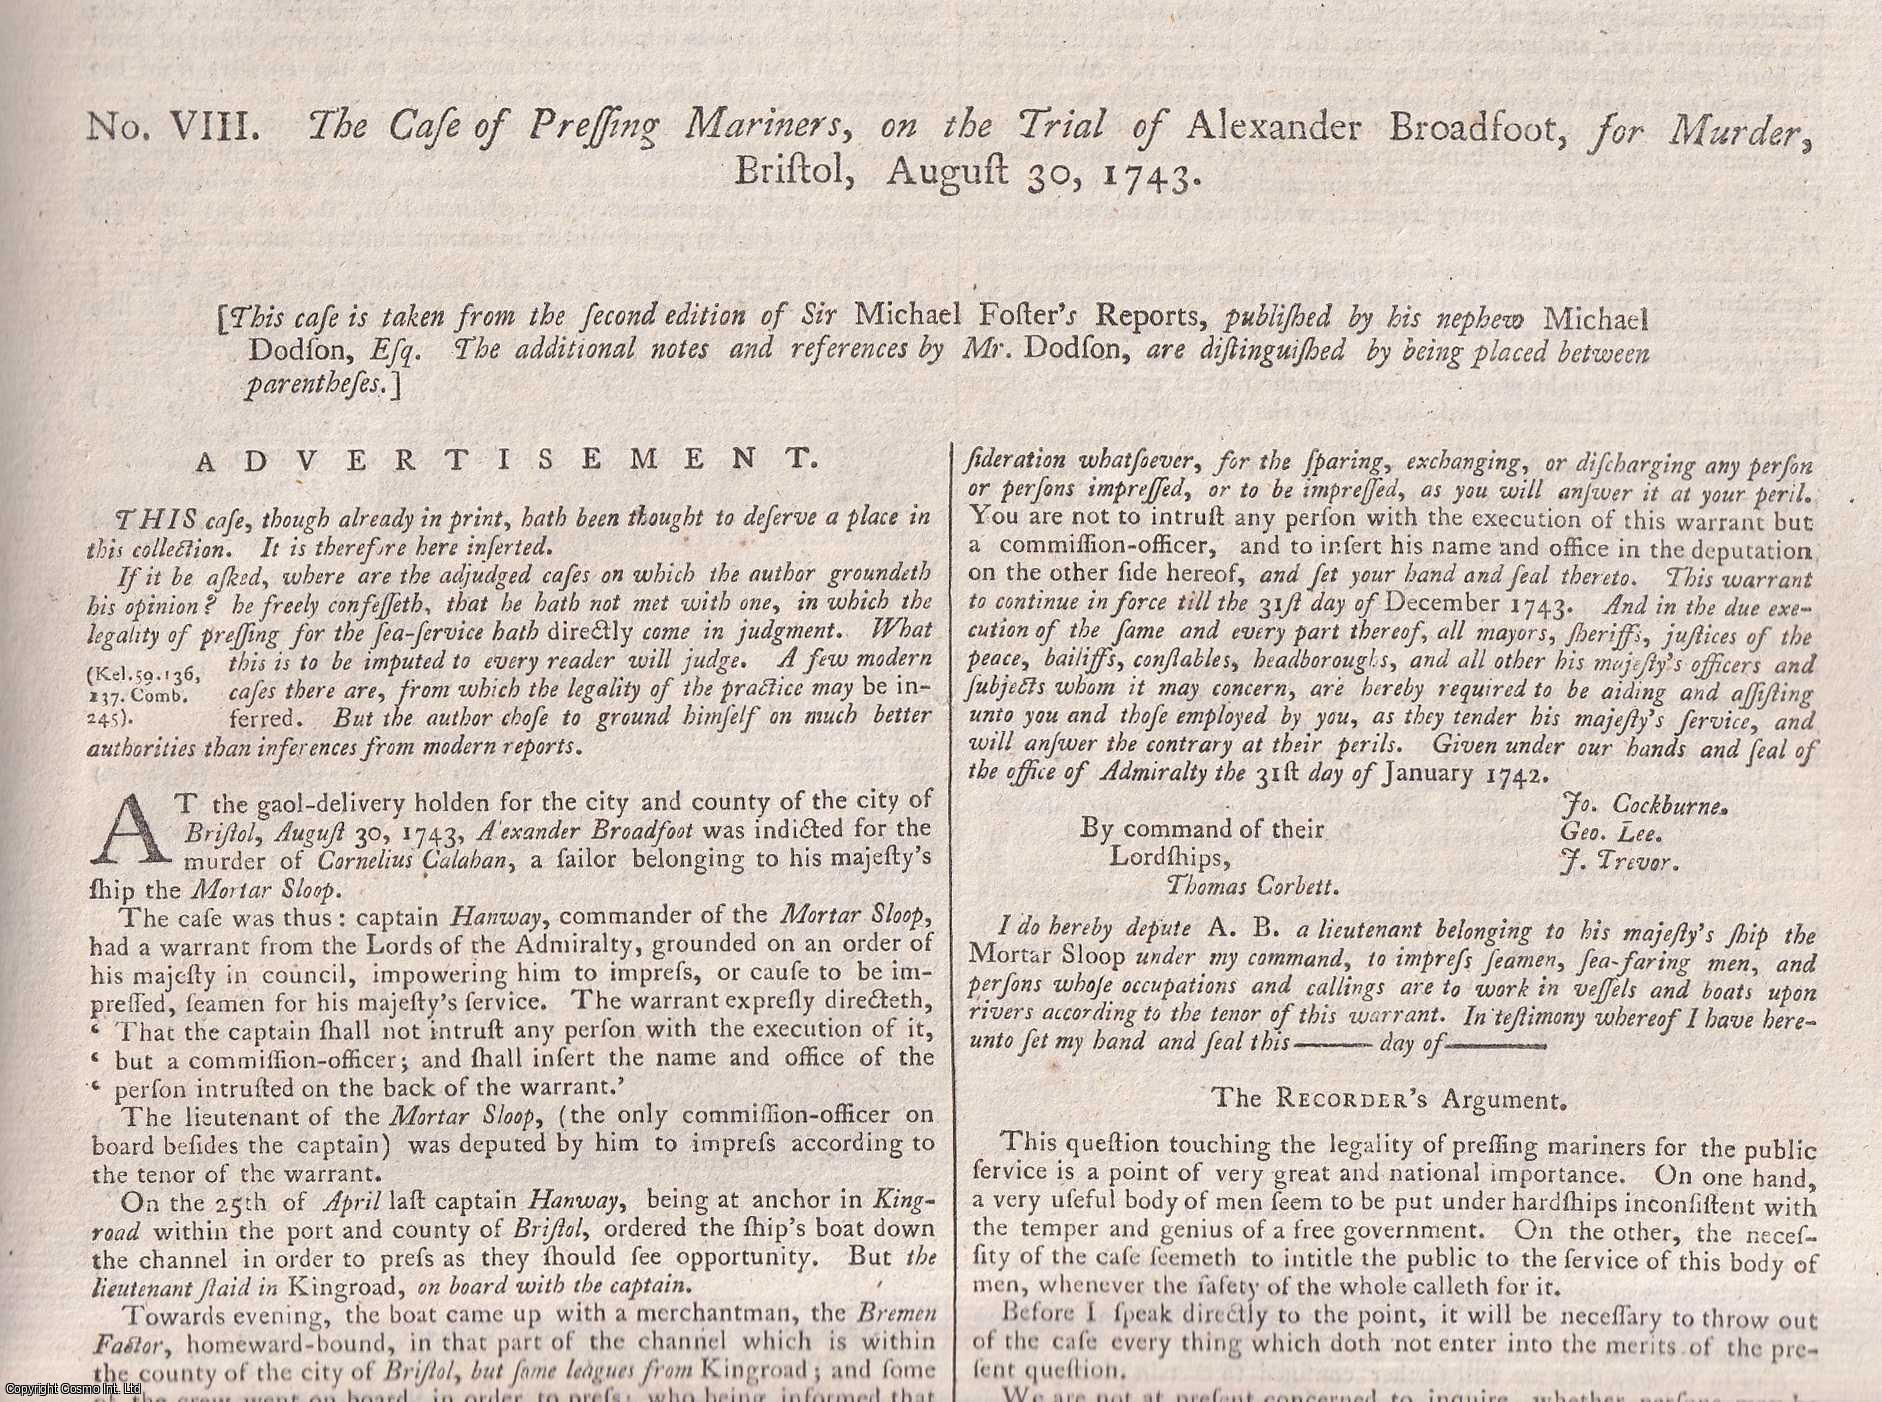 [Trial] - NAVY PRESS GANG, 1743. The Case of Pressing Mariners, on the Trial of Alexander Broadfoot, for Murder, Bristol, August 30, 1743. An original article from the Collected State Trials.